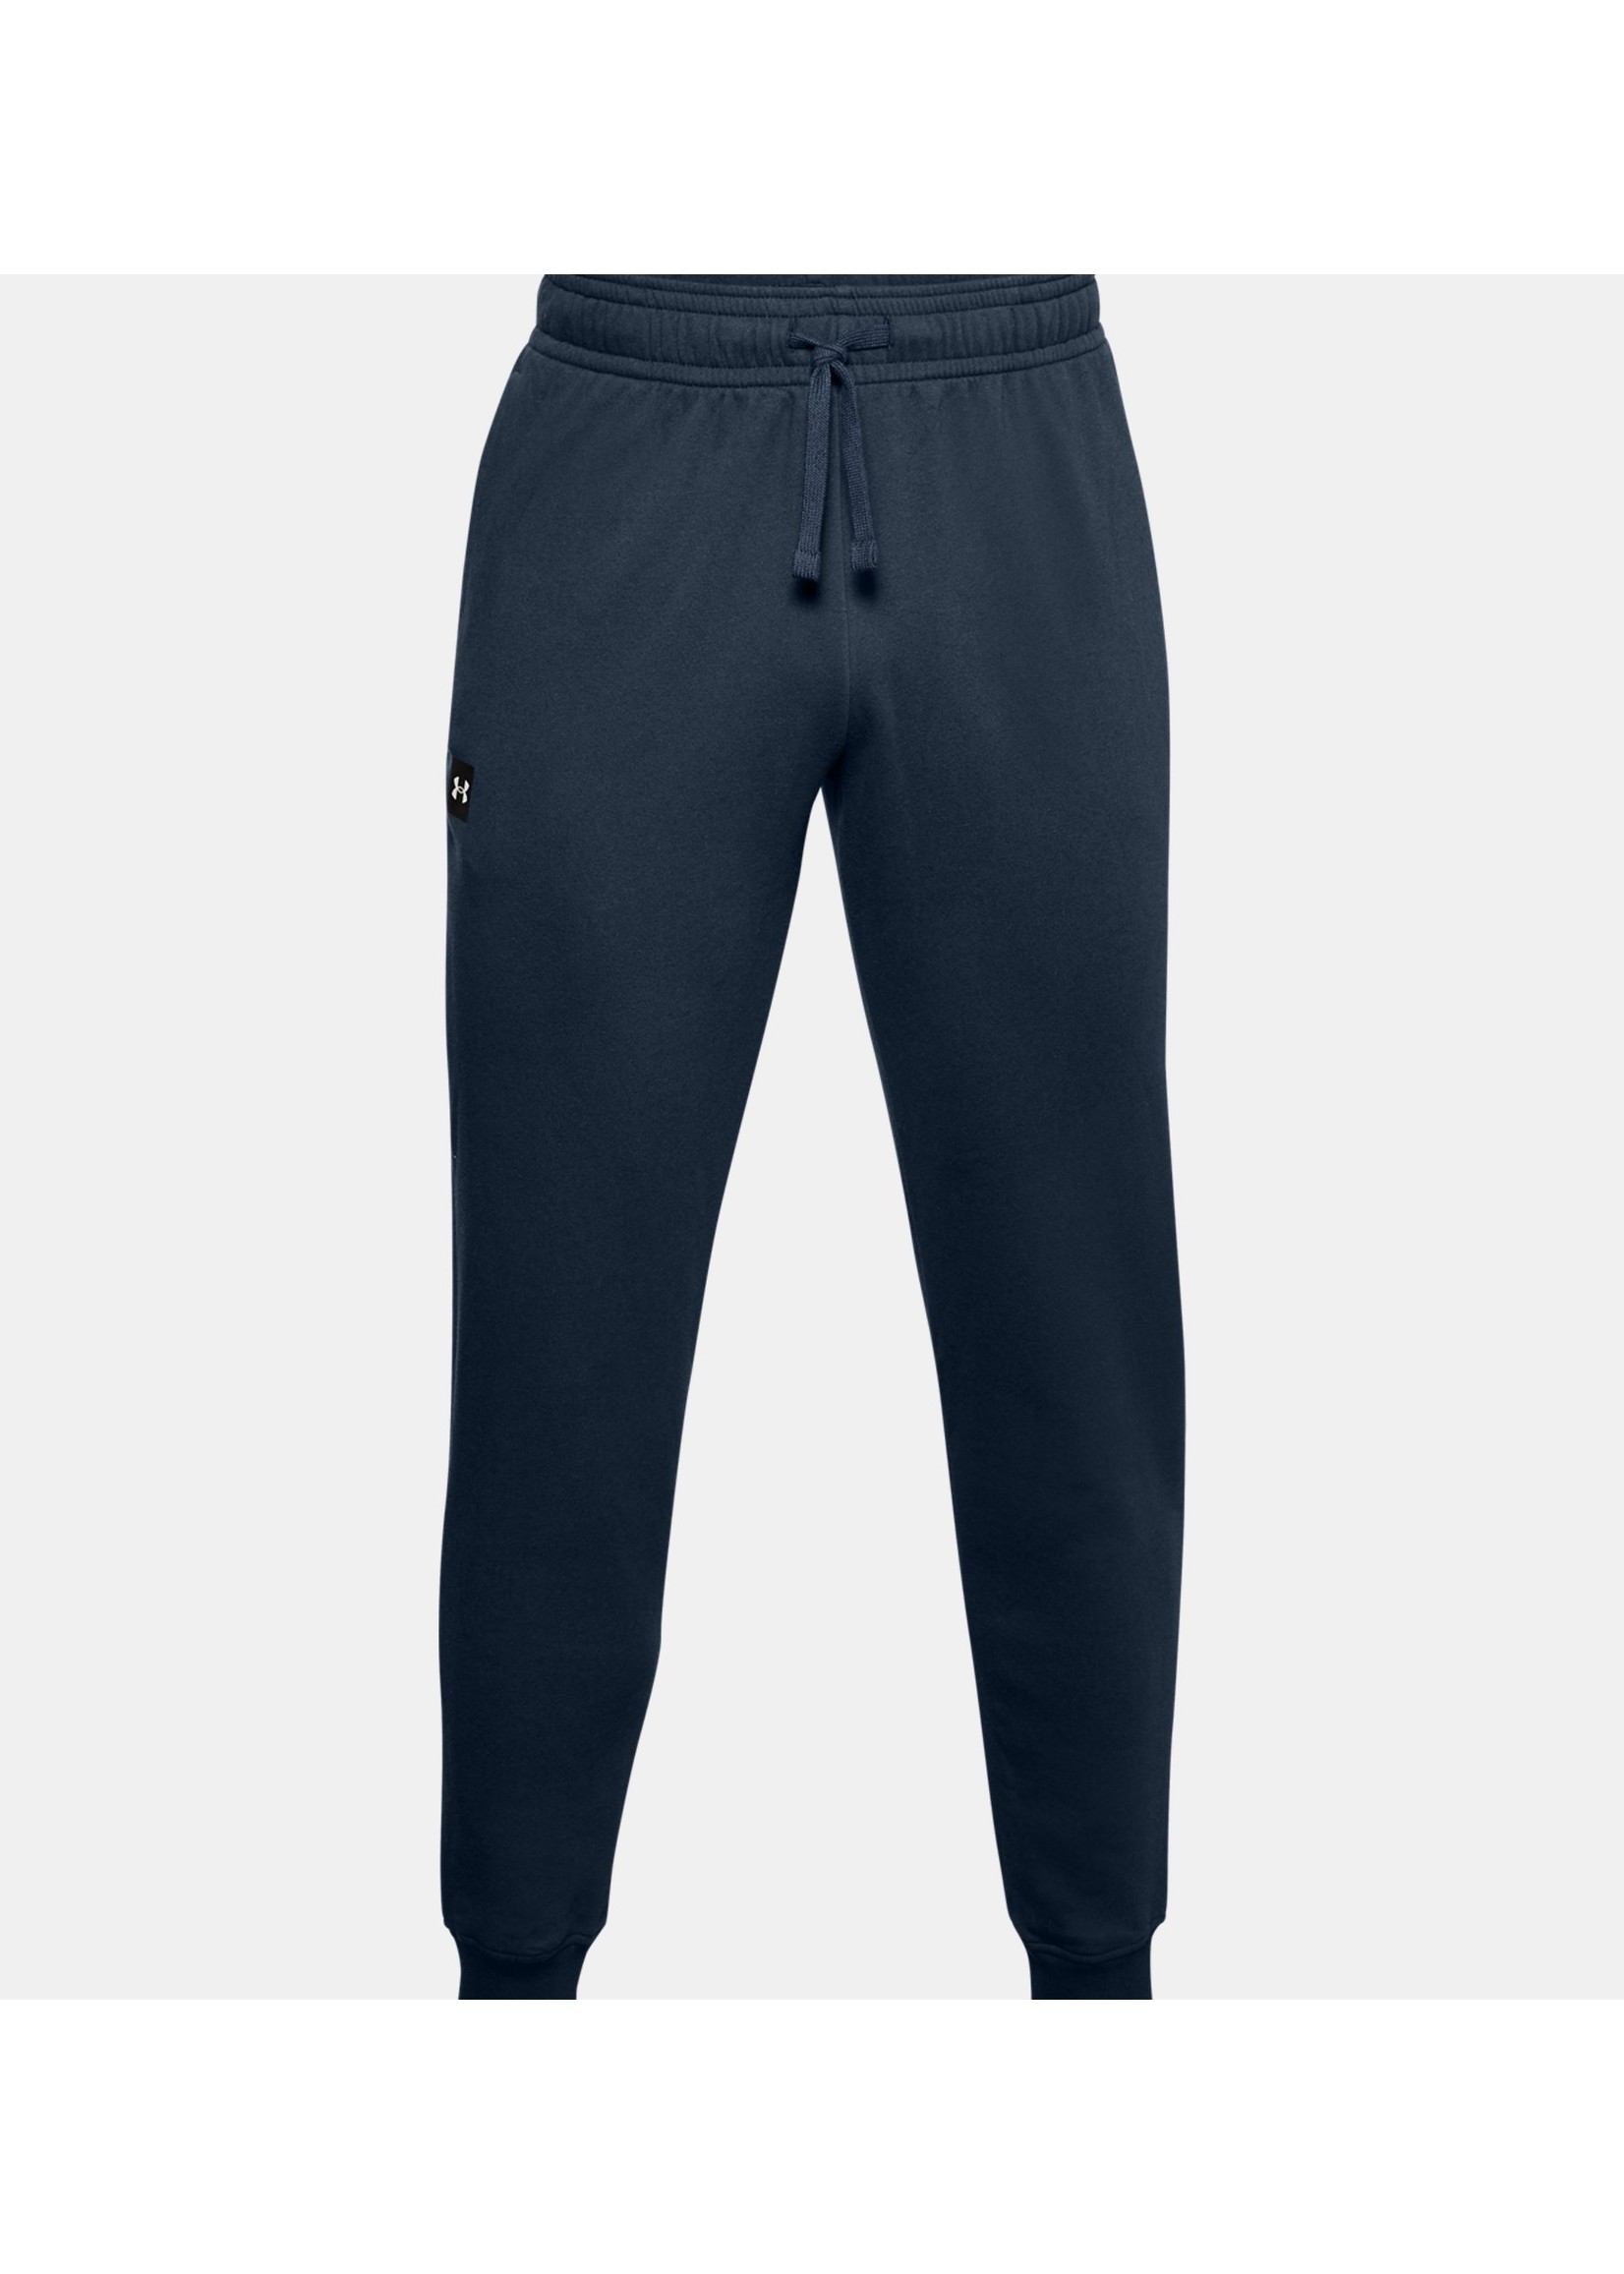 Under Armour Rival Fleece Joggers Trousers in Blue